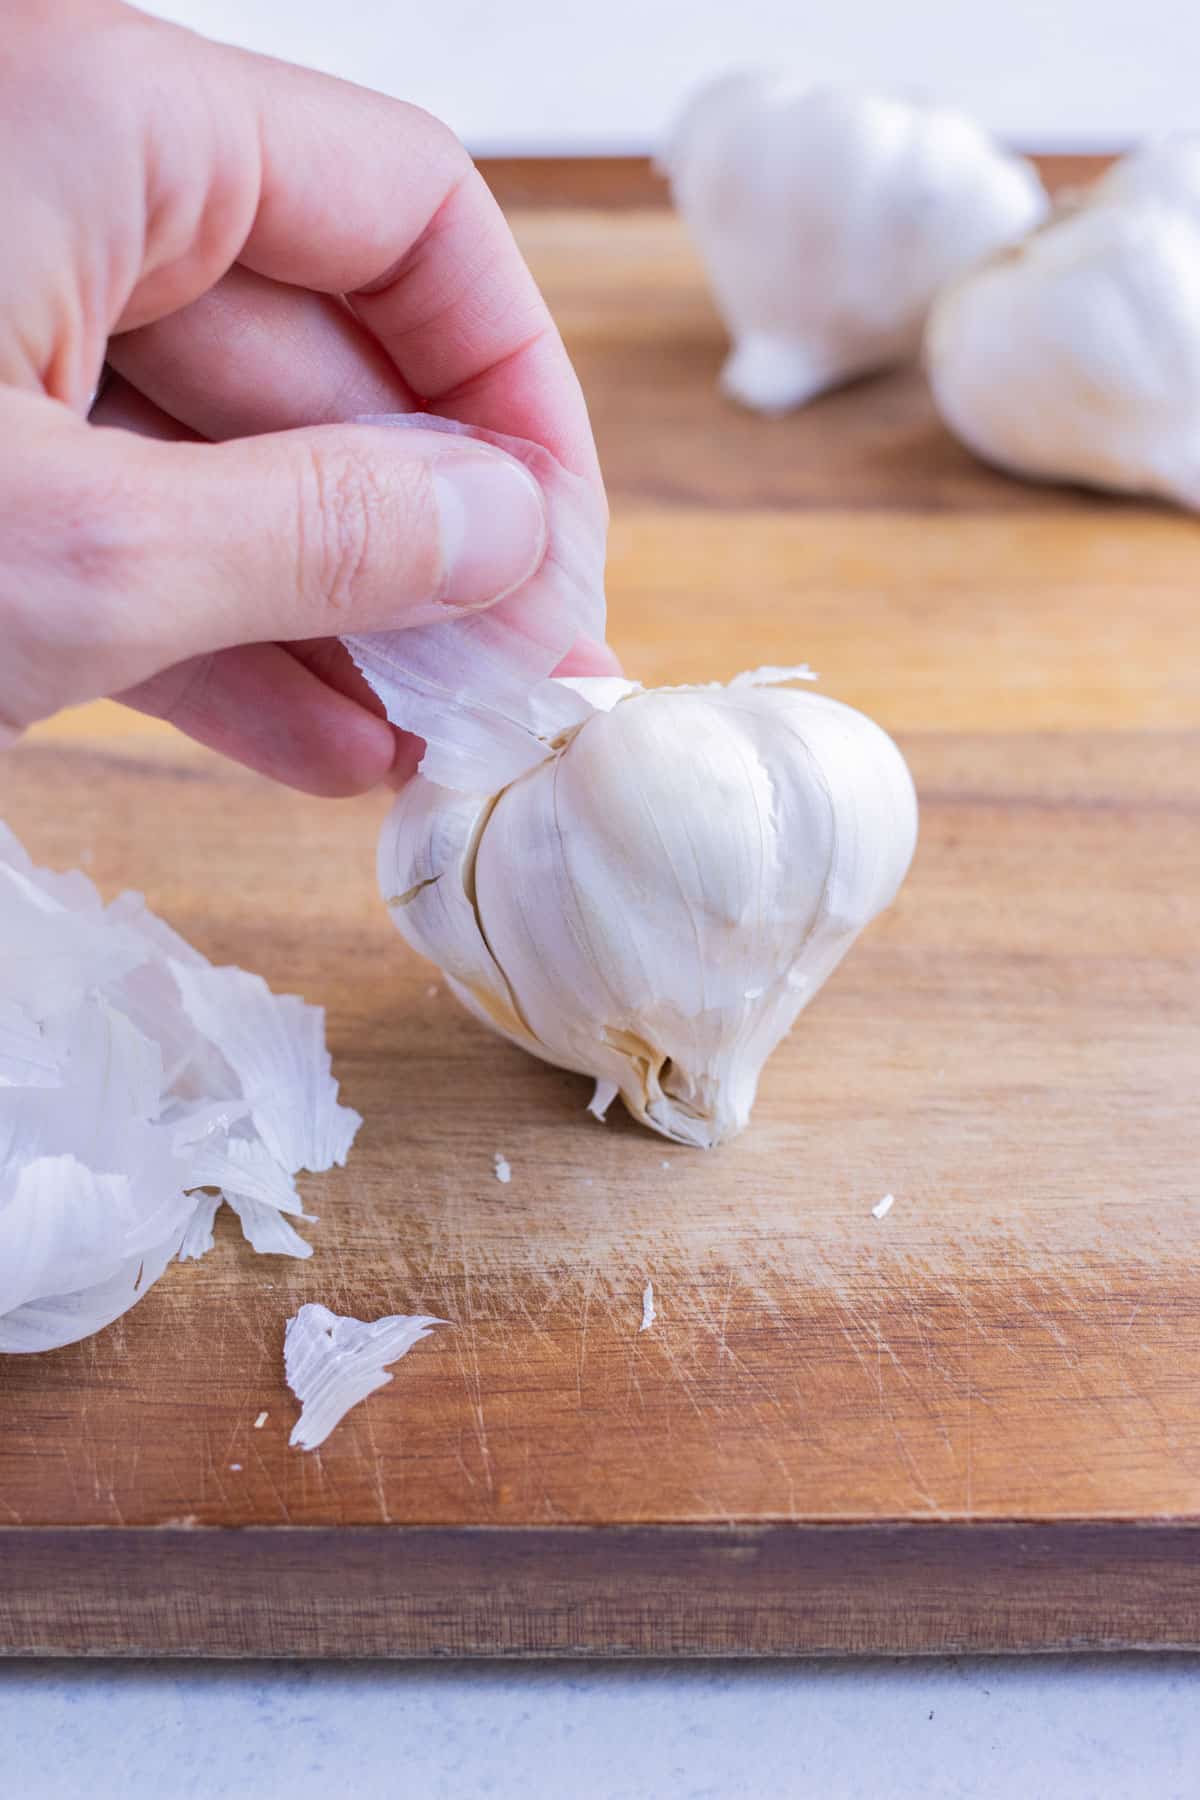 The garlic is completely peeled with a hand.